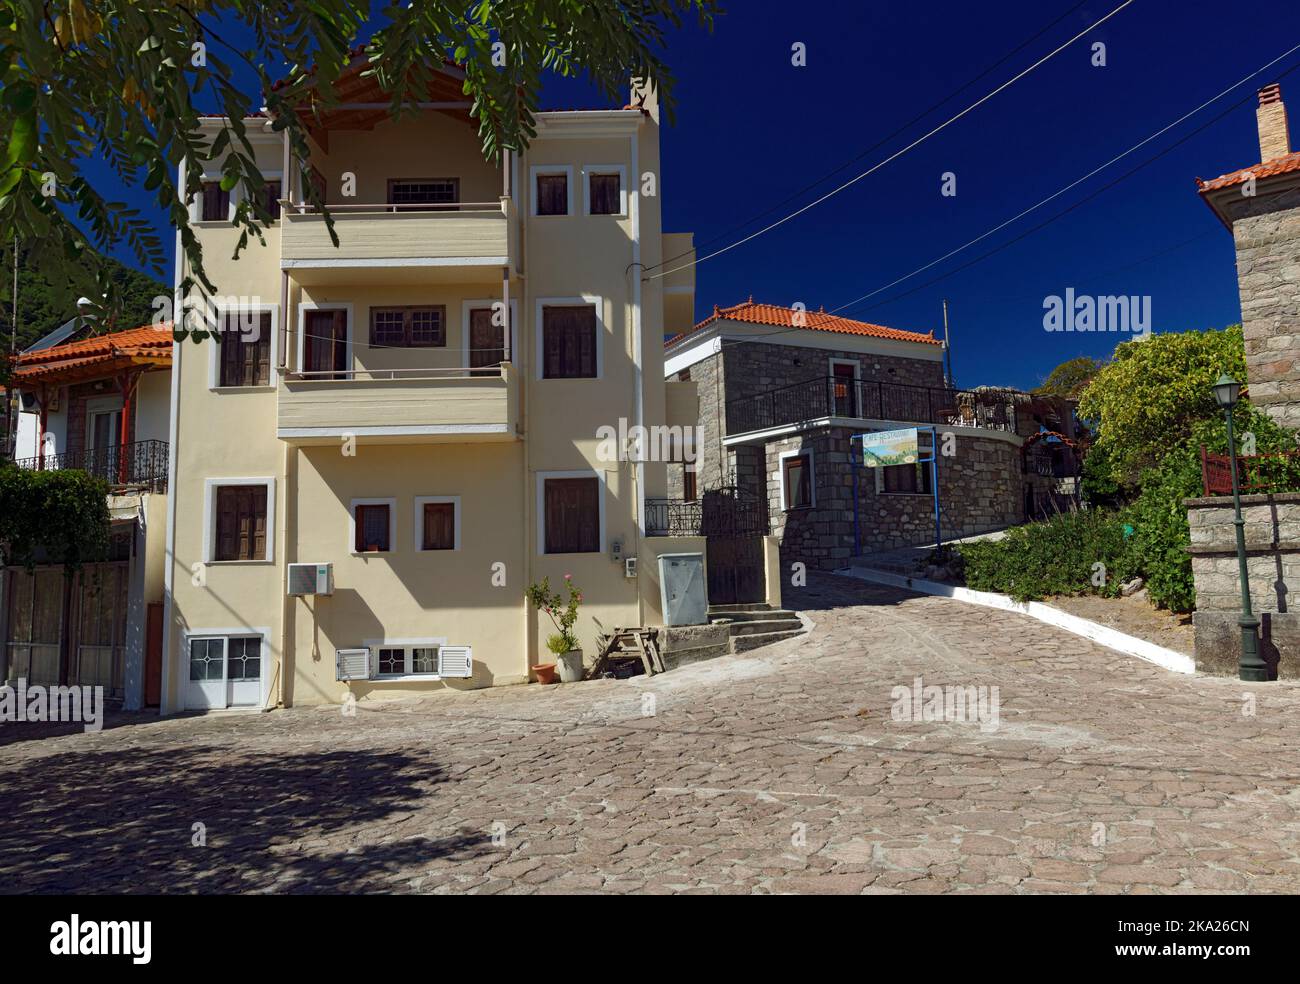 The mountain village of Lafionas, North Lesbos, Northern Aegean Islands, Greece. Stock Photo